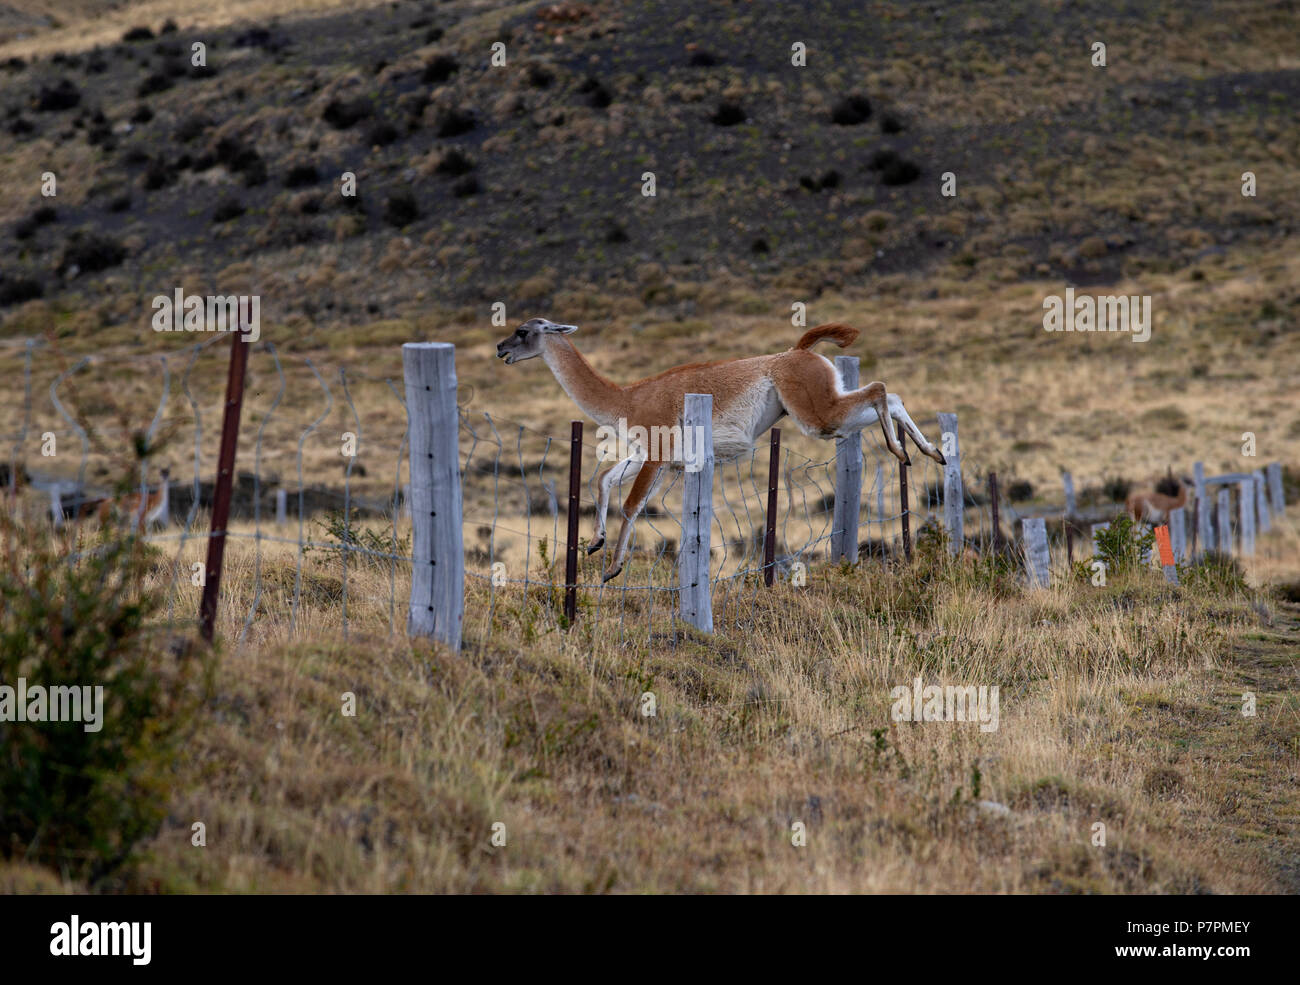 Adult Guanaco jumping fence line between the Torres del Paine National Park and a neighbouring private ranch. Stock Photo